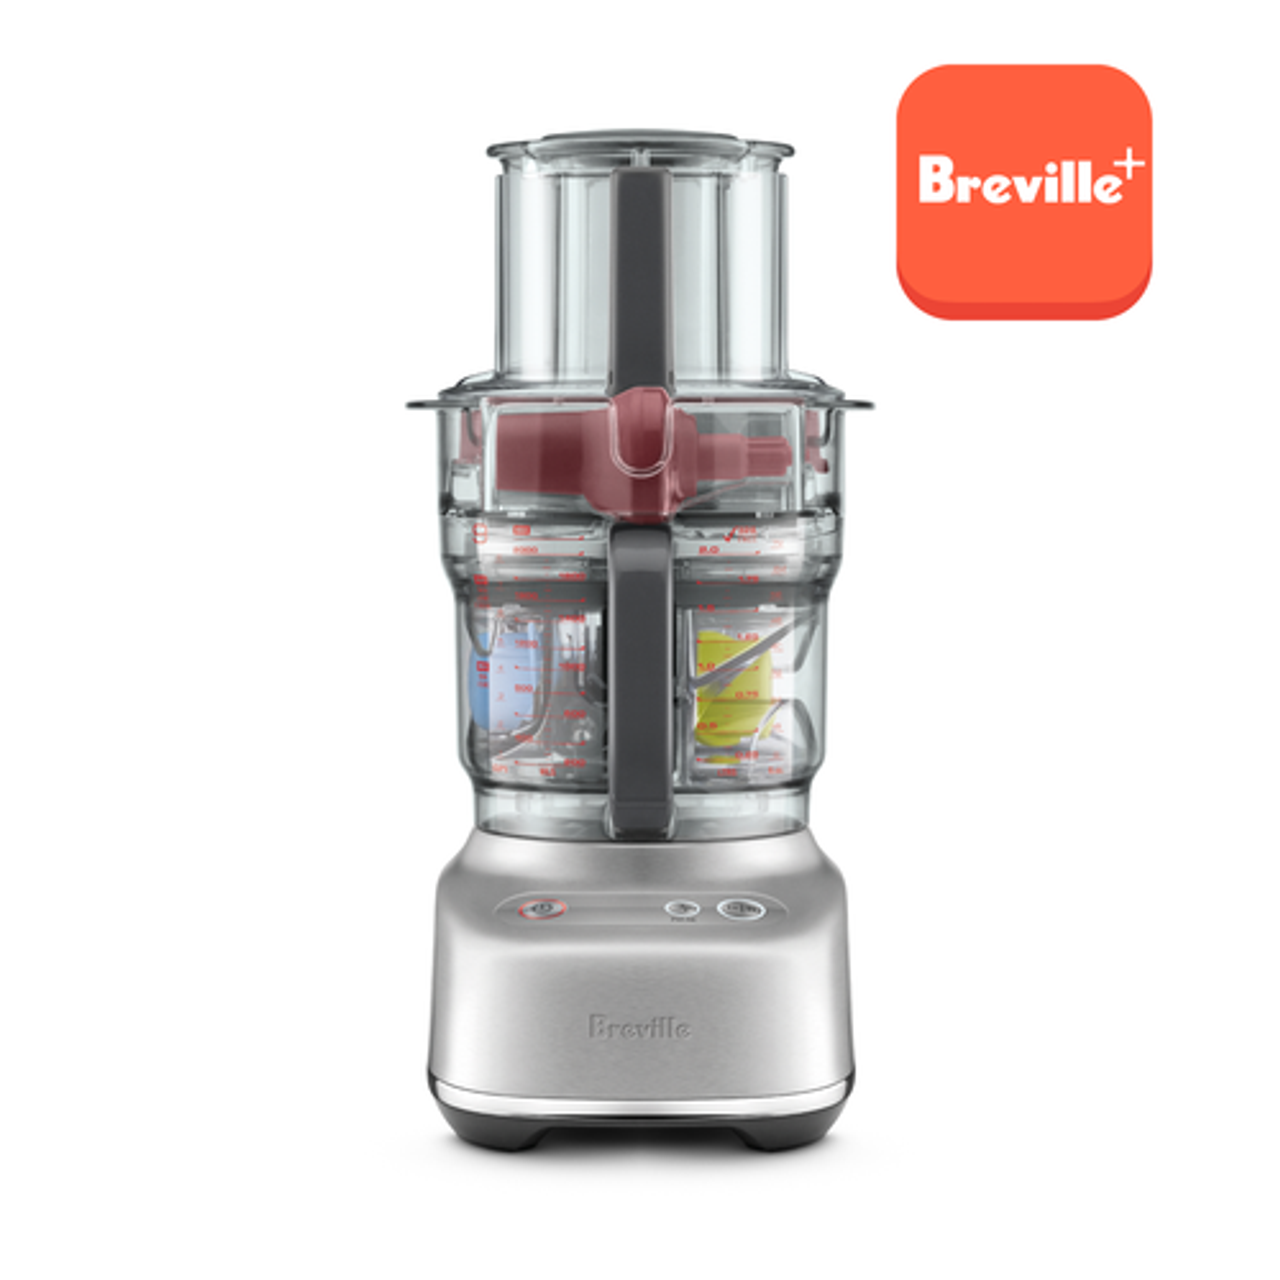 Breville - the Paradice 9-Cup Food Processor - Brushed Stainless Steel